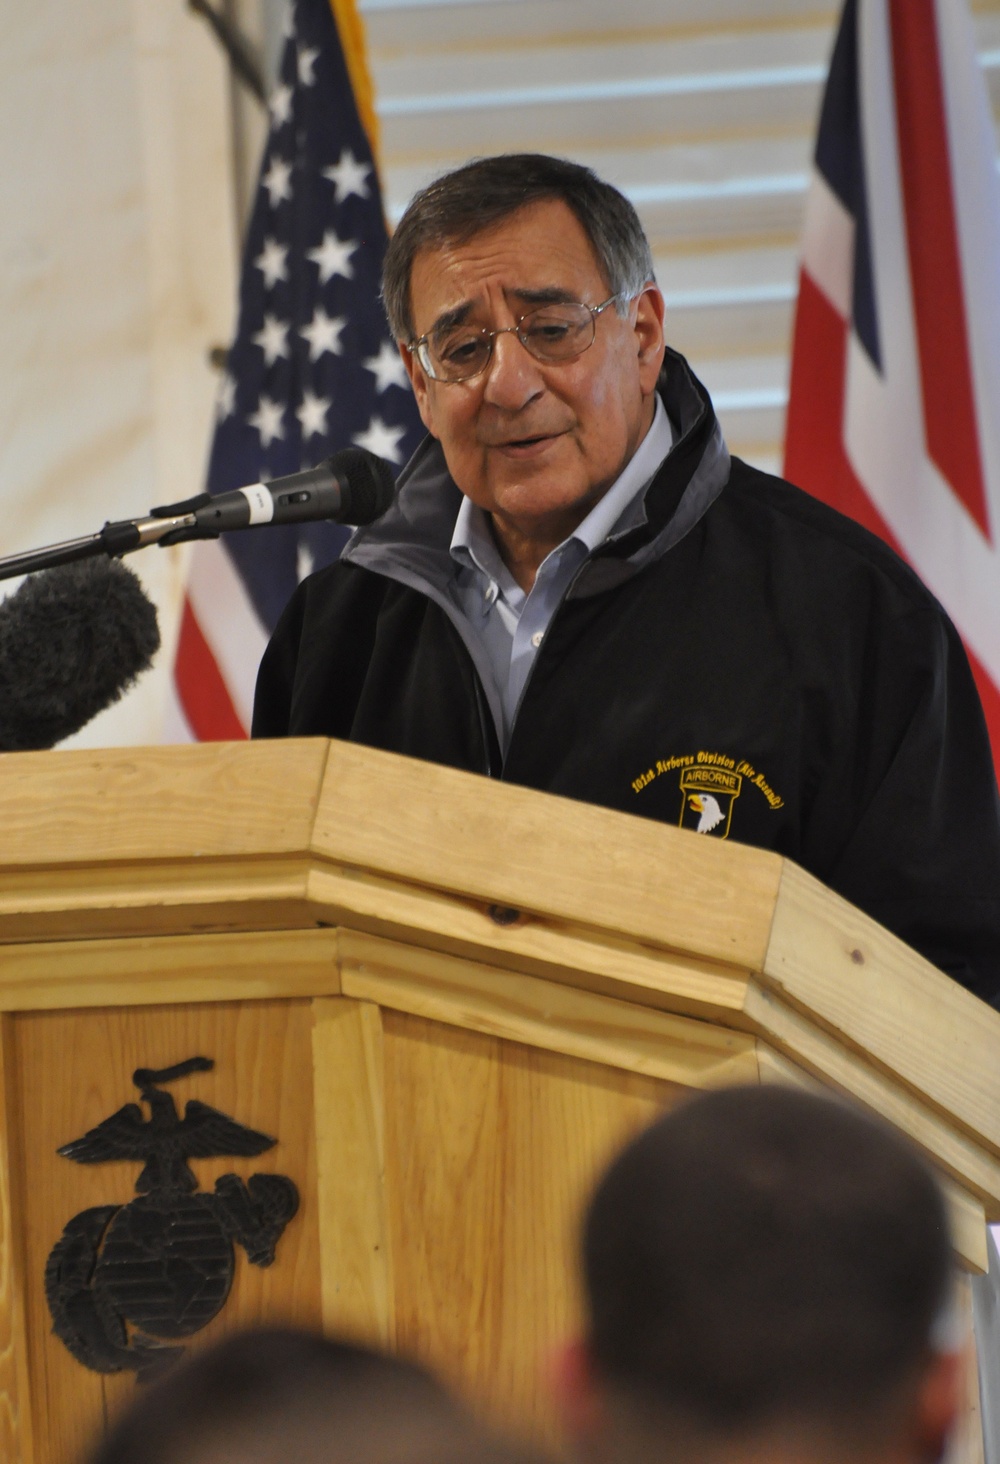 U.S. Secretary of Defense Leon Panetta visited Camp Leatherneck to thank coalition troops for their service